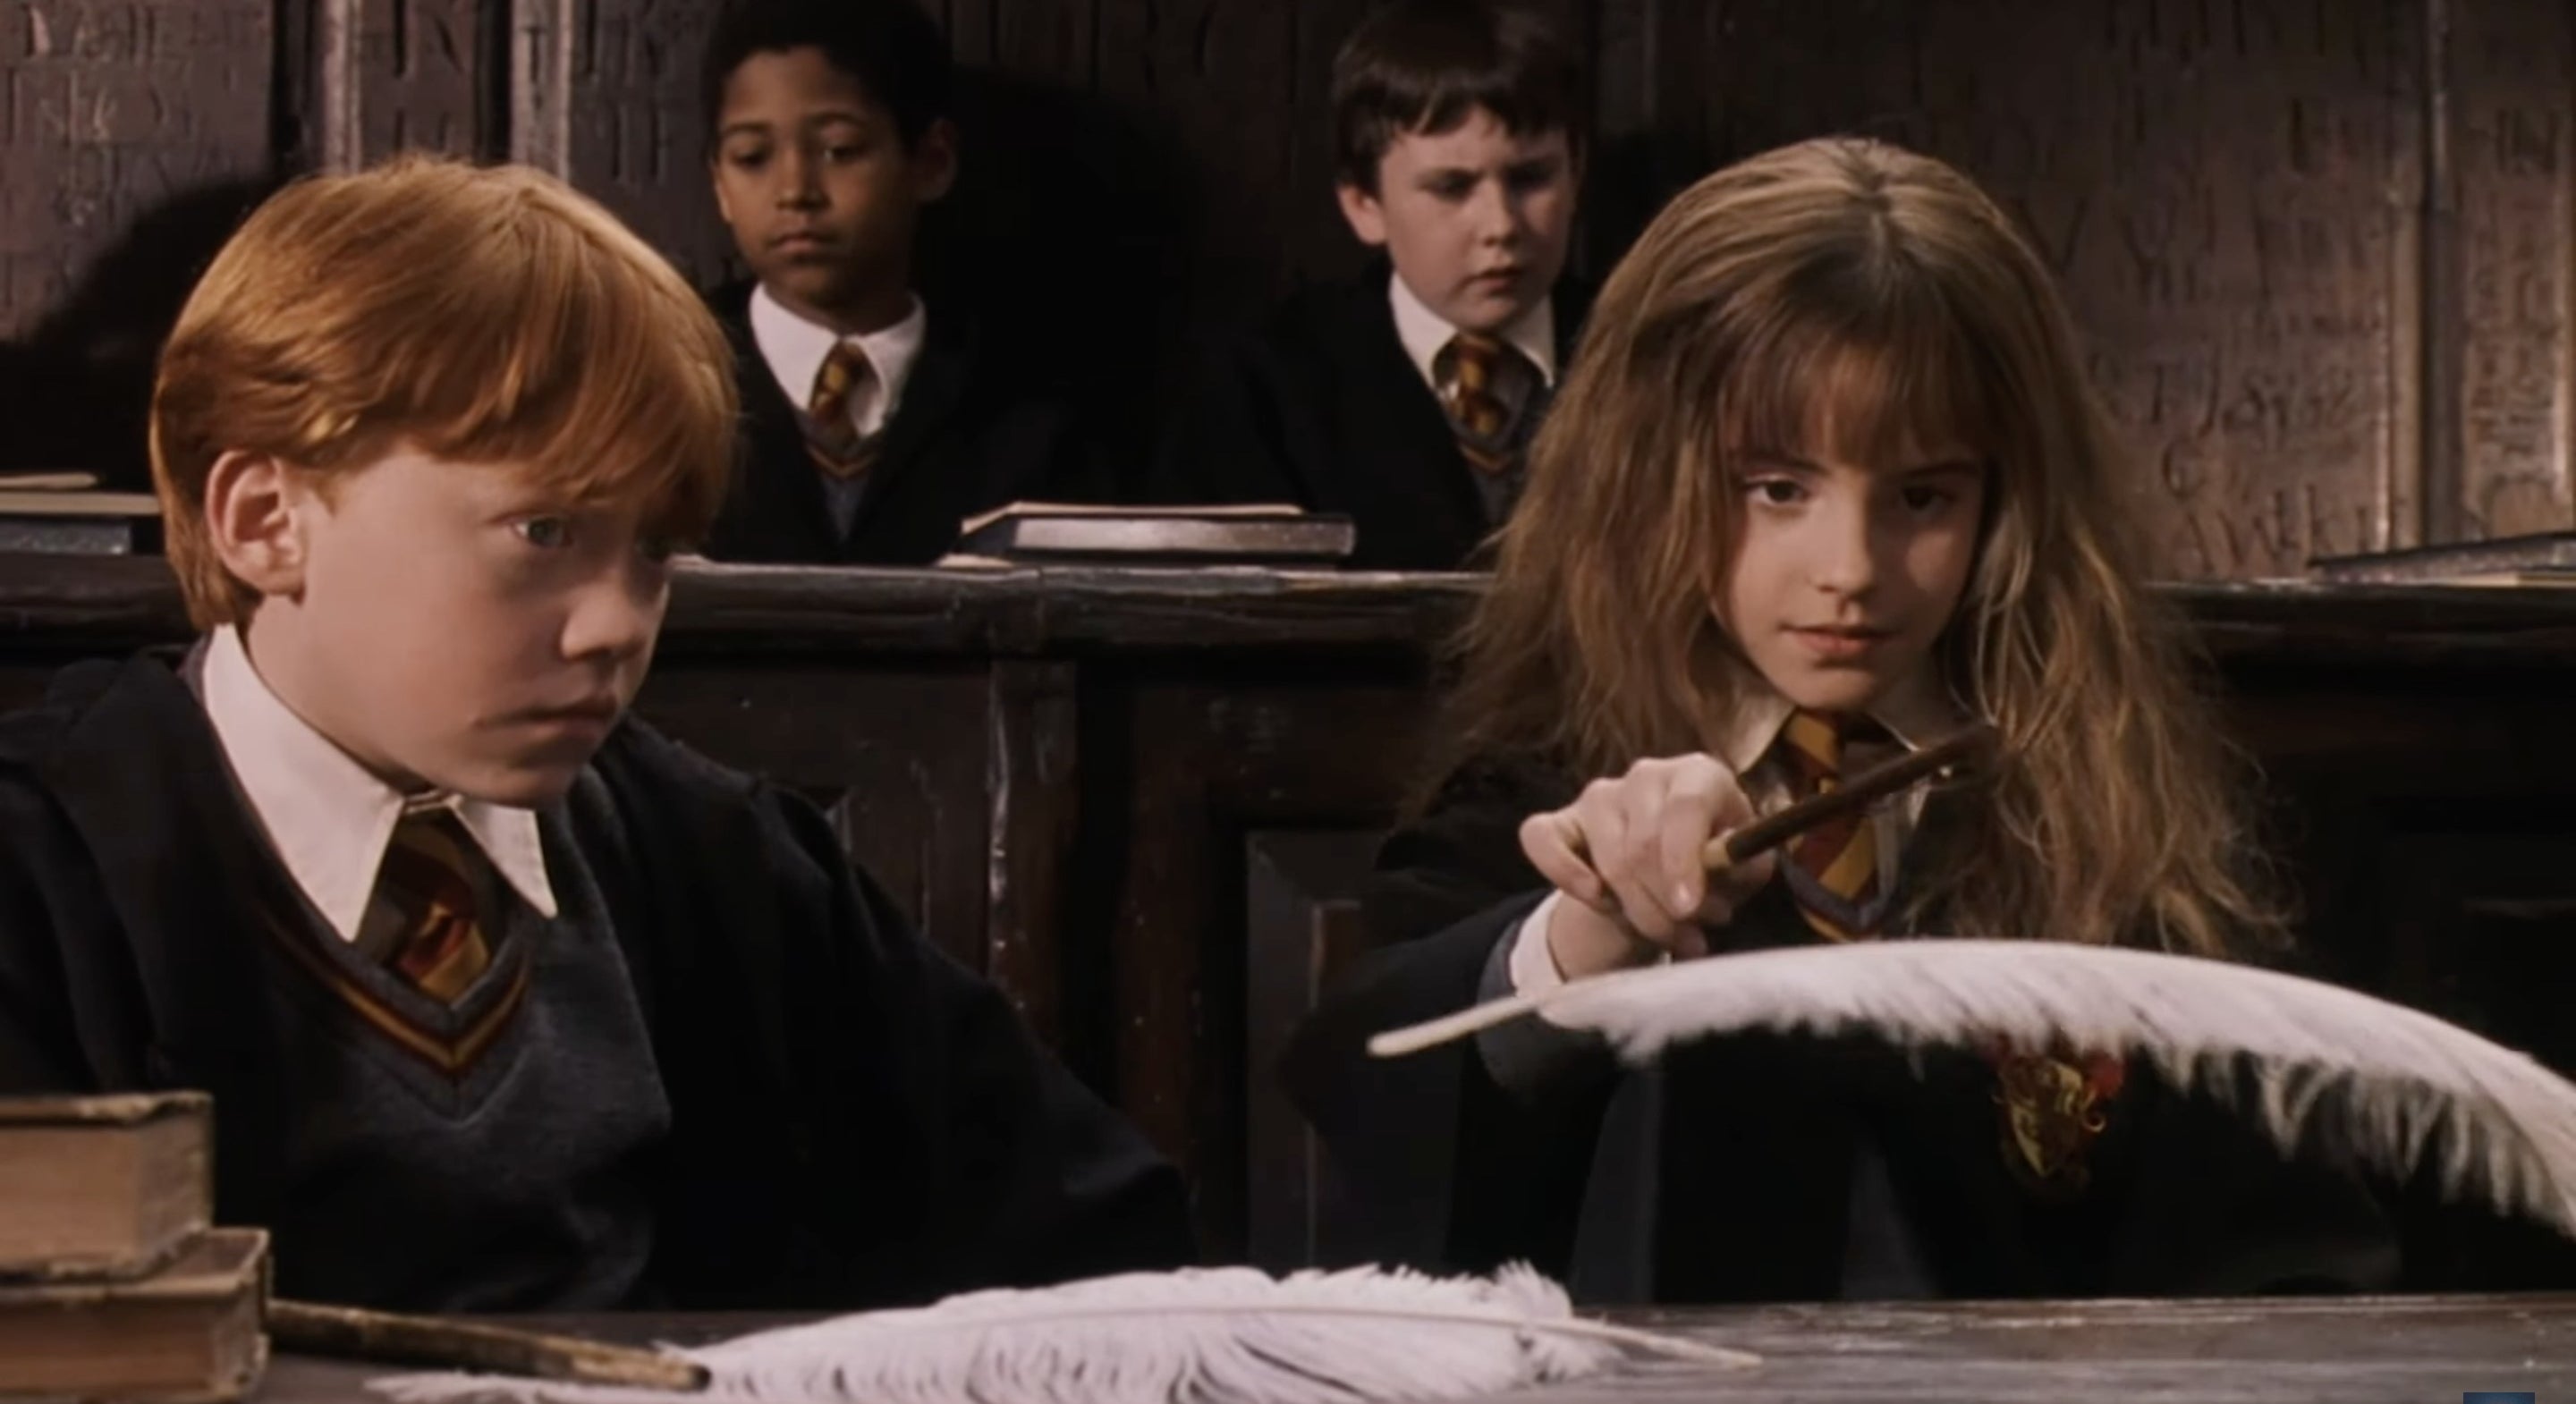 Ron Weasley and Hermione Granger